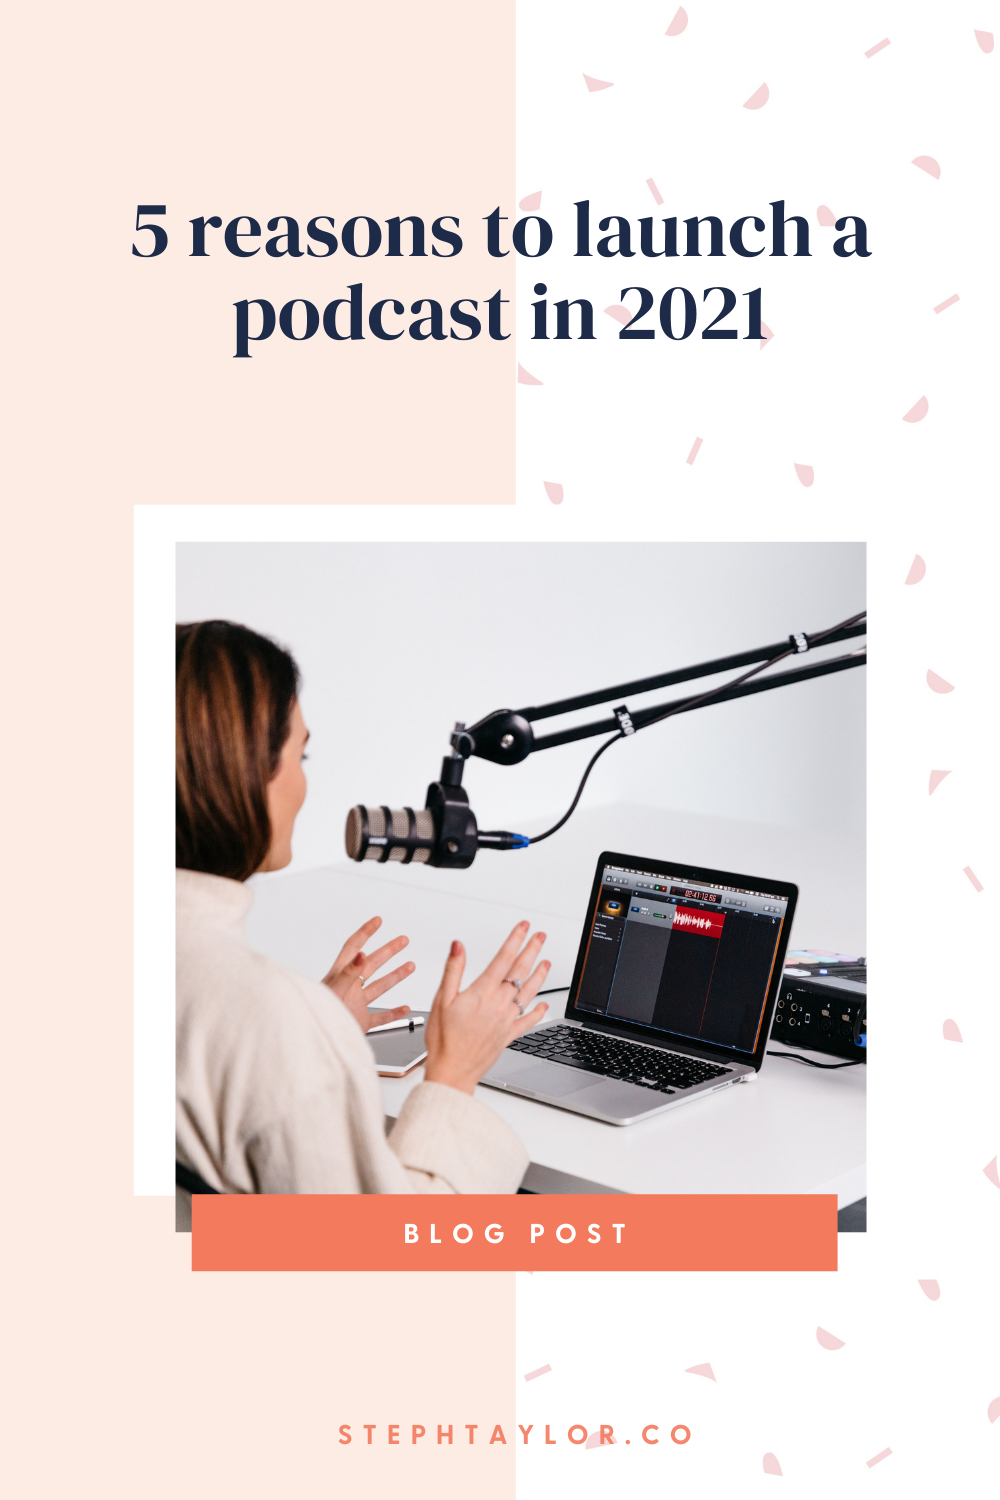 5 reasons to launch a podcast 2021